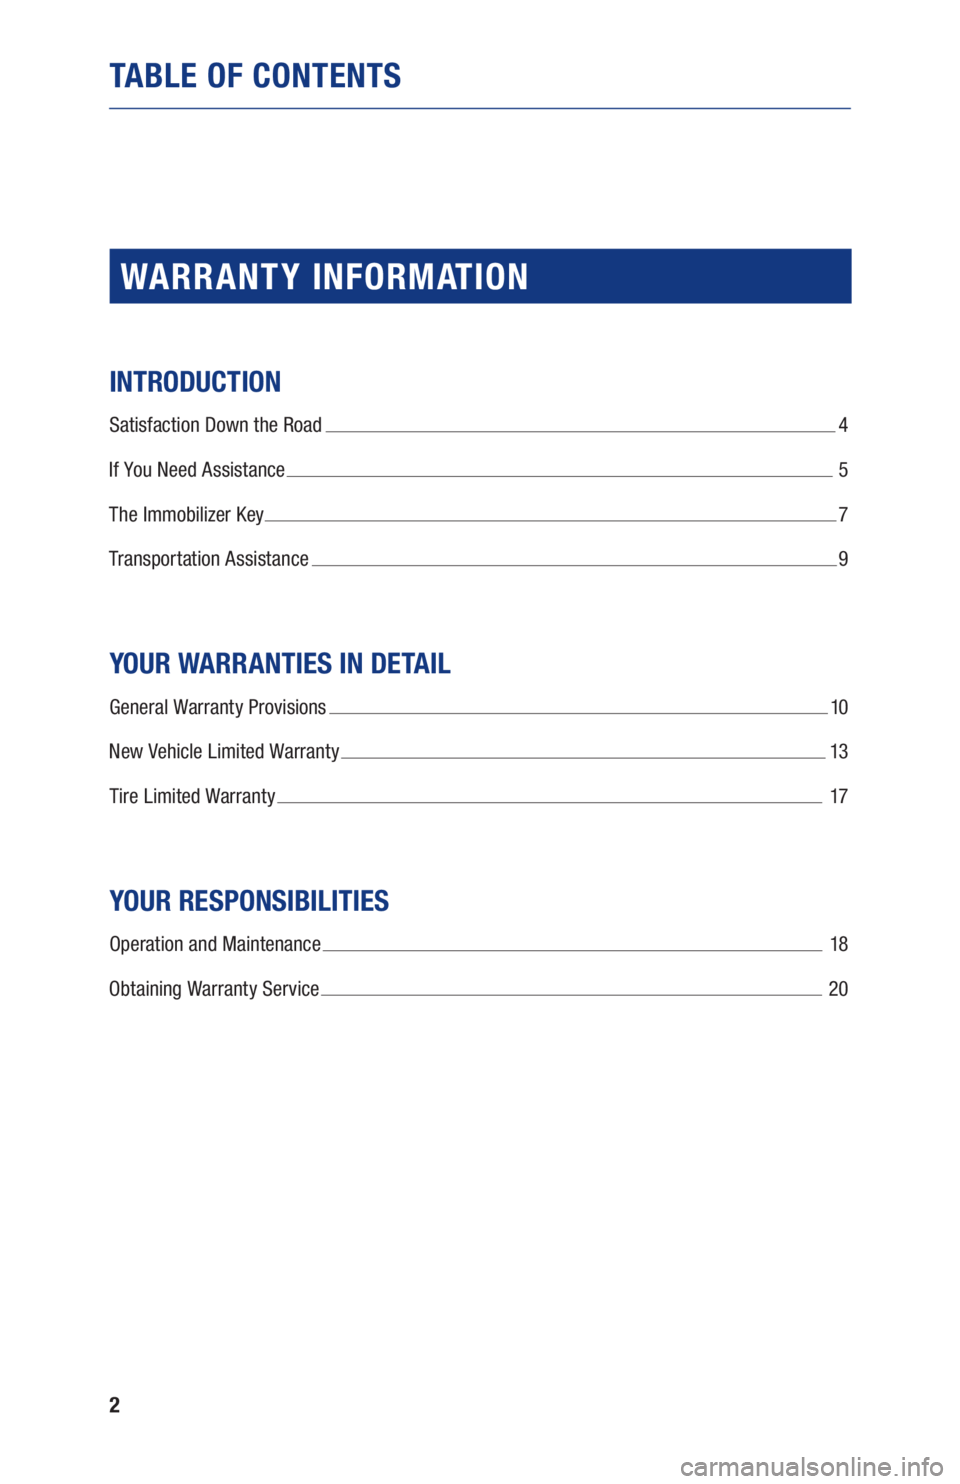 TOYOTA MIRAI 2020  Warranties & Maintenance Guides (in English) 2
TABLE OF CONTENTS
WARR ANT Y INFORMATION
INTRODUCTION
Satisfaction Down the Road  4
If You Need Assistance 
 5
The Immobilizer Key 
 7
Transportation Assistance 
 9
YOUR WARRANTIES IN DETAIL
General